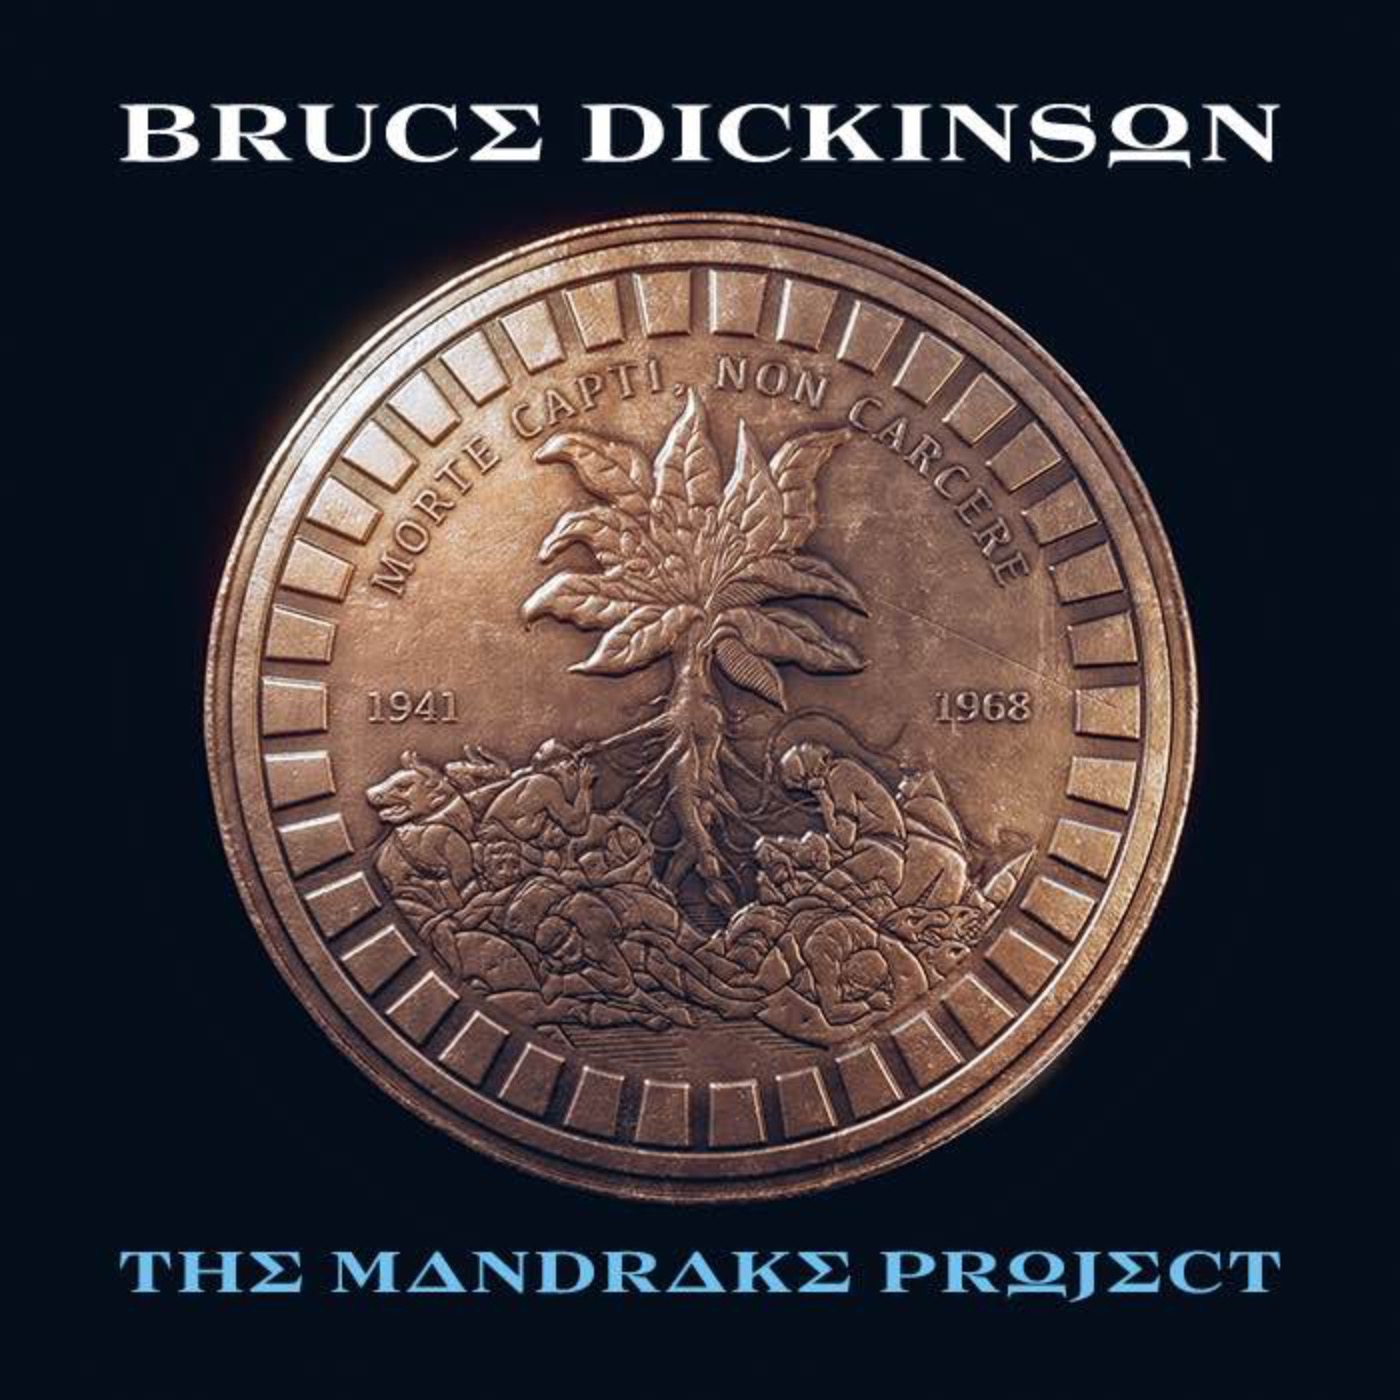 cover art for Bruce Dickinson's The Mandrake Project